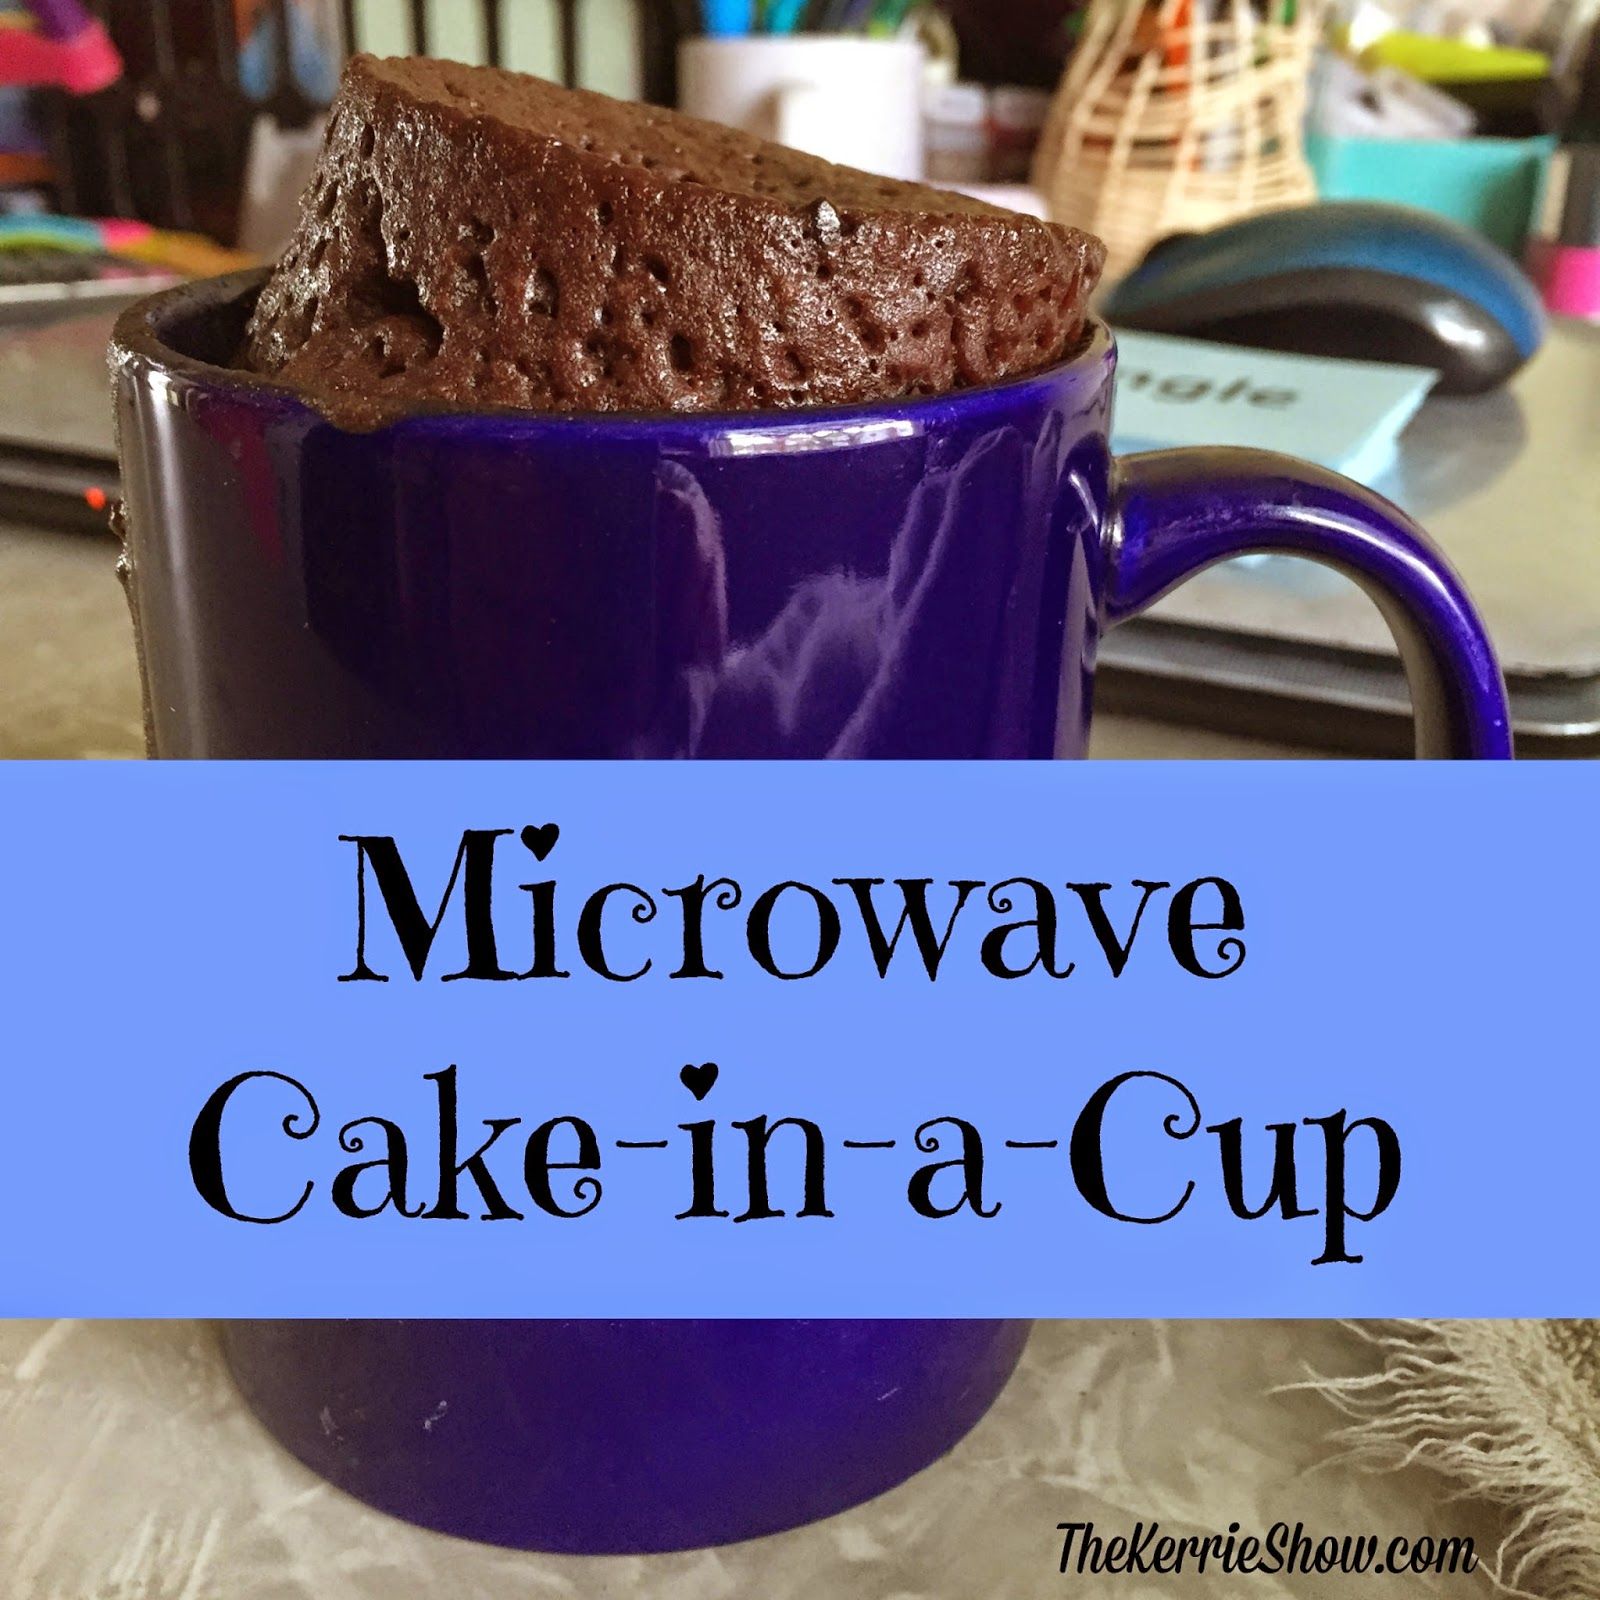 Microwave Cake in a Cup #CakeInACup